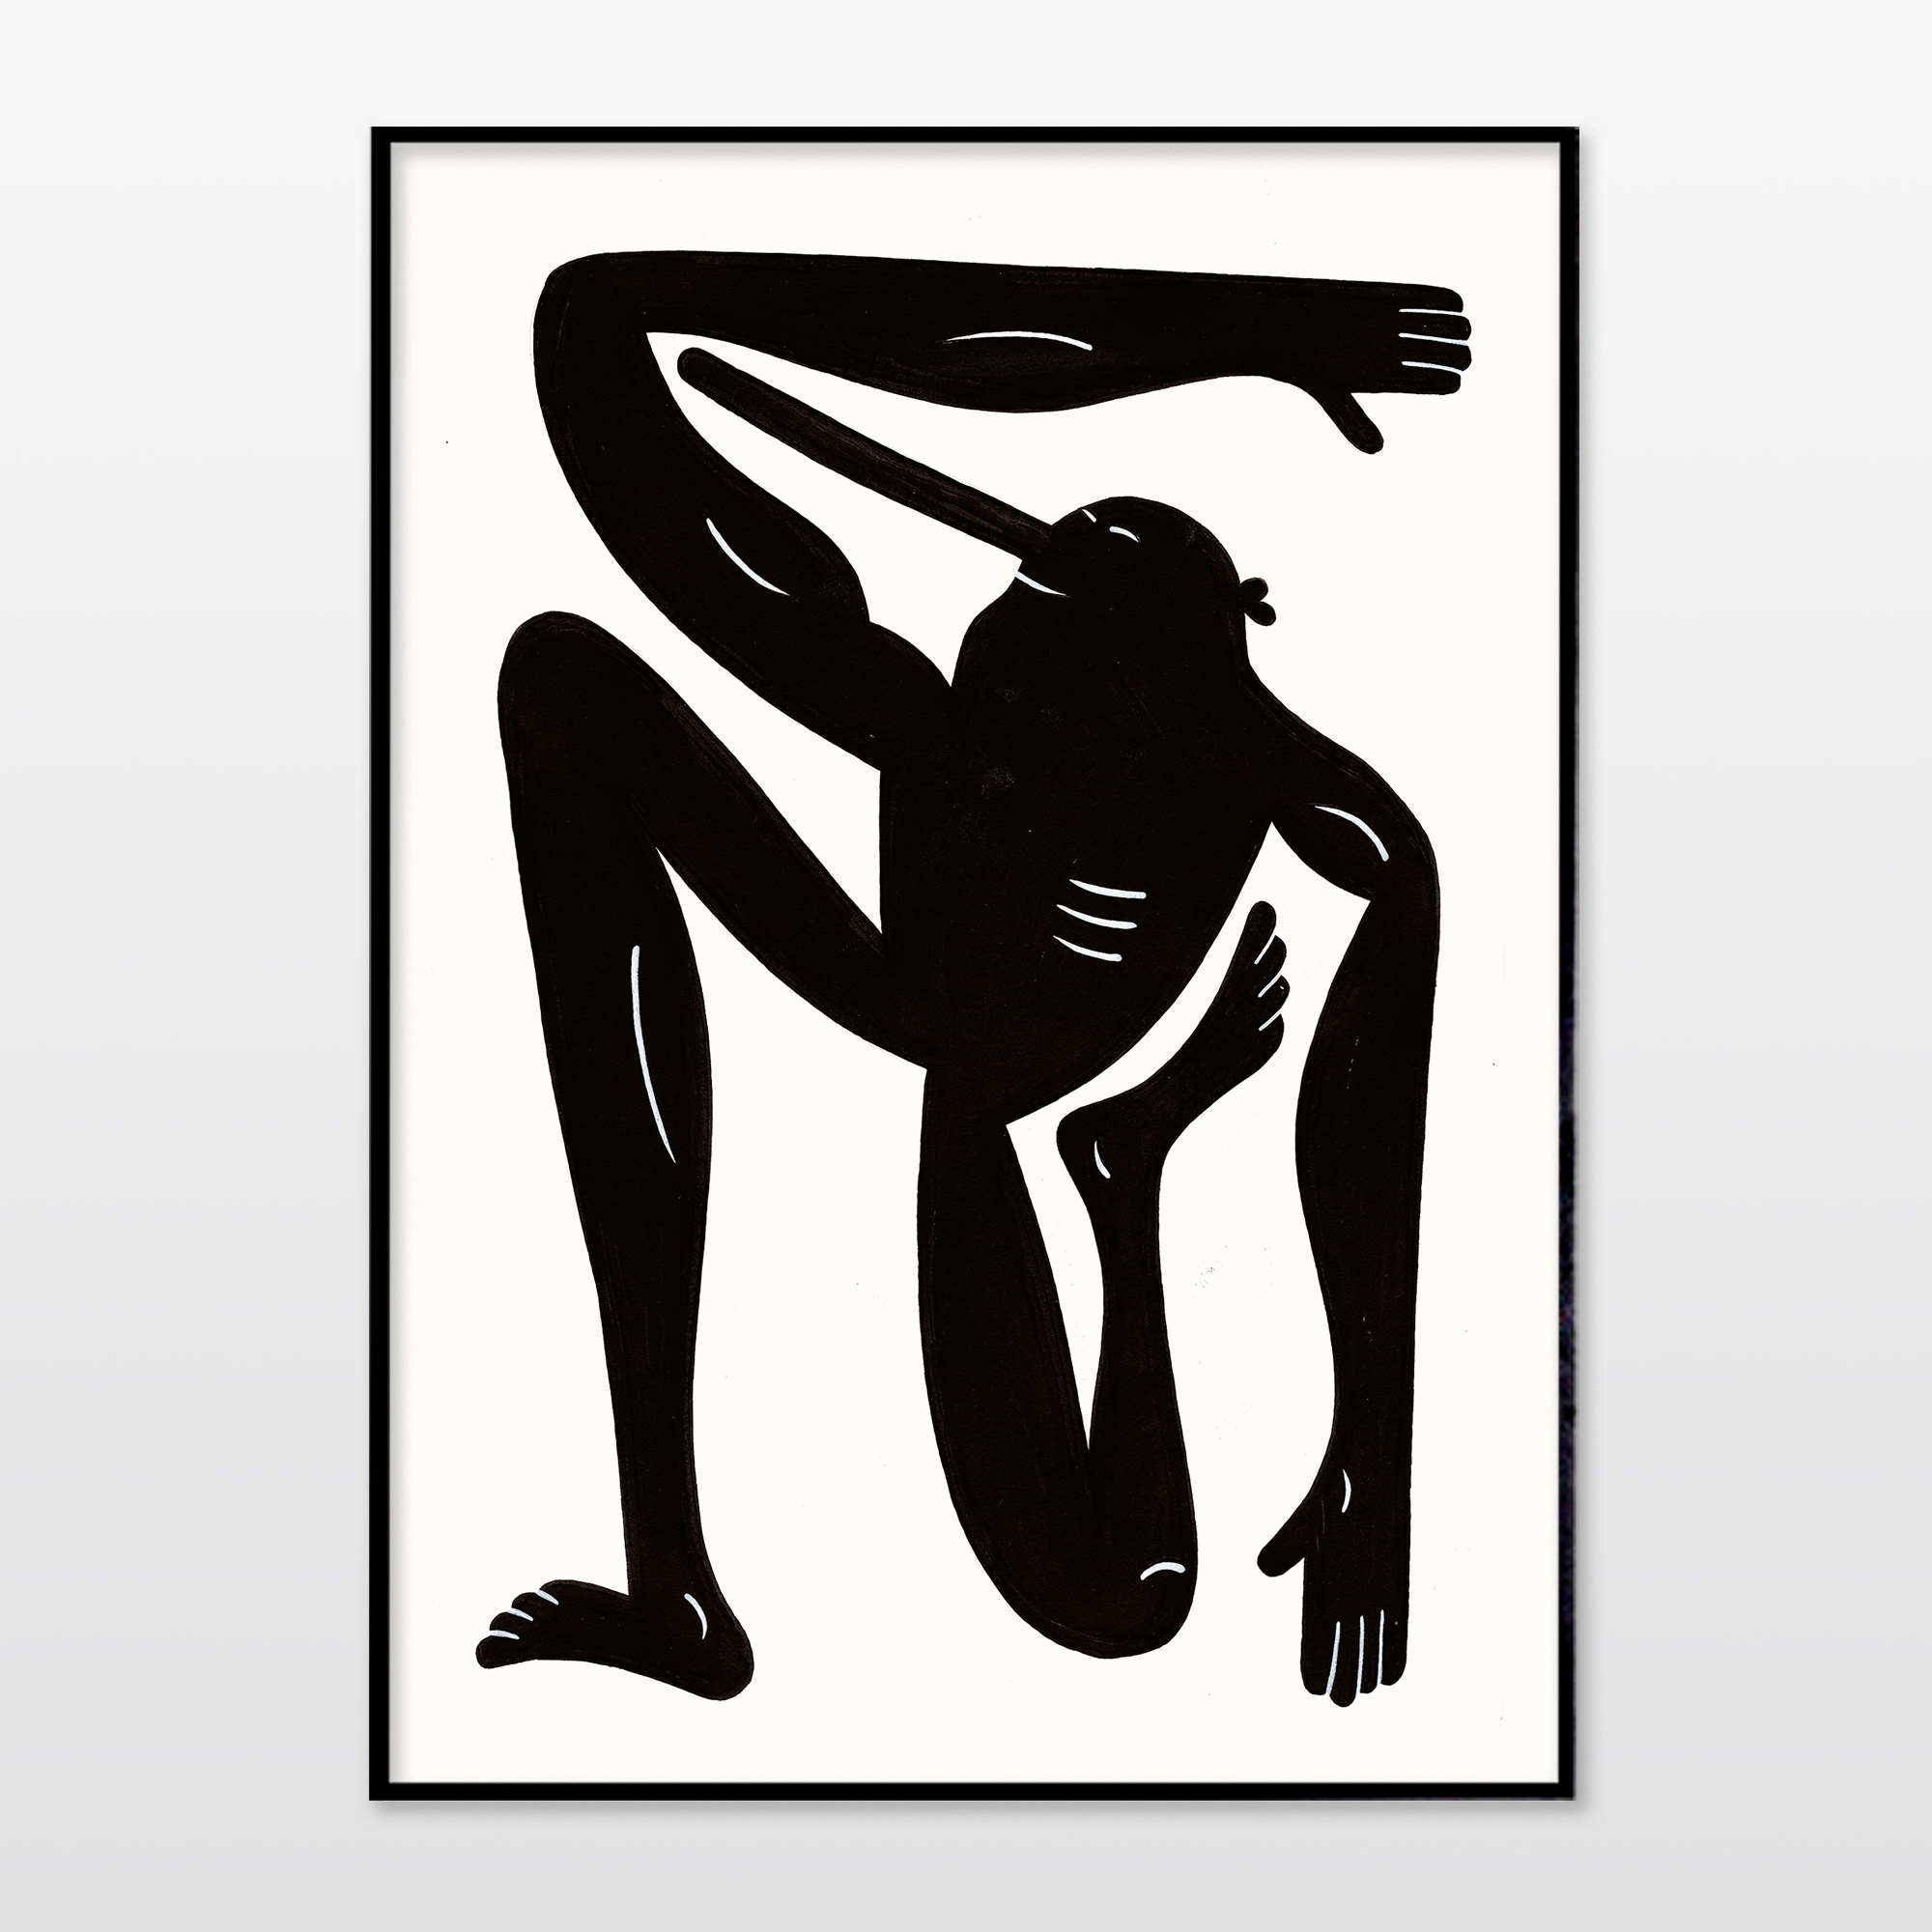 art-prints, giclee, family-friendly, figurative, graphical, illustrative, minimalistic, bodies, cartoons, humor, movement, people, sport, blue, ink, paper, amusing, contemporary-art, copenhagen, danish, interior, interior-design, modern, modern-art, nordic, posters, prints, scandinavien, Buy original high quality art. Paintings, drawings, limited edition prints & posters by talented artists.